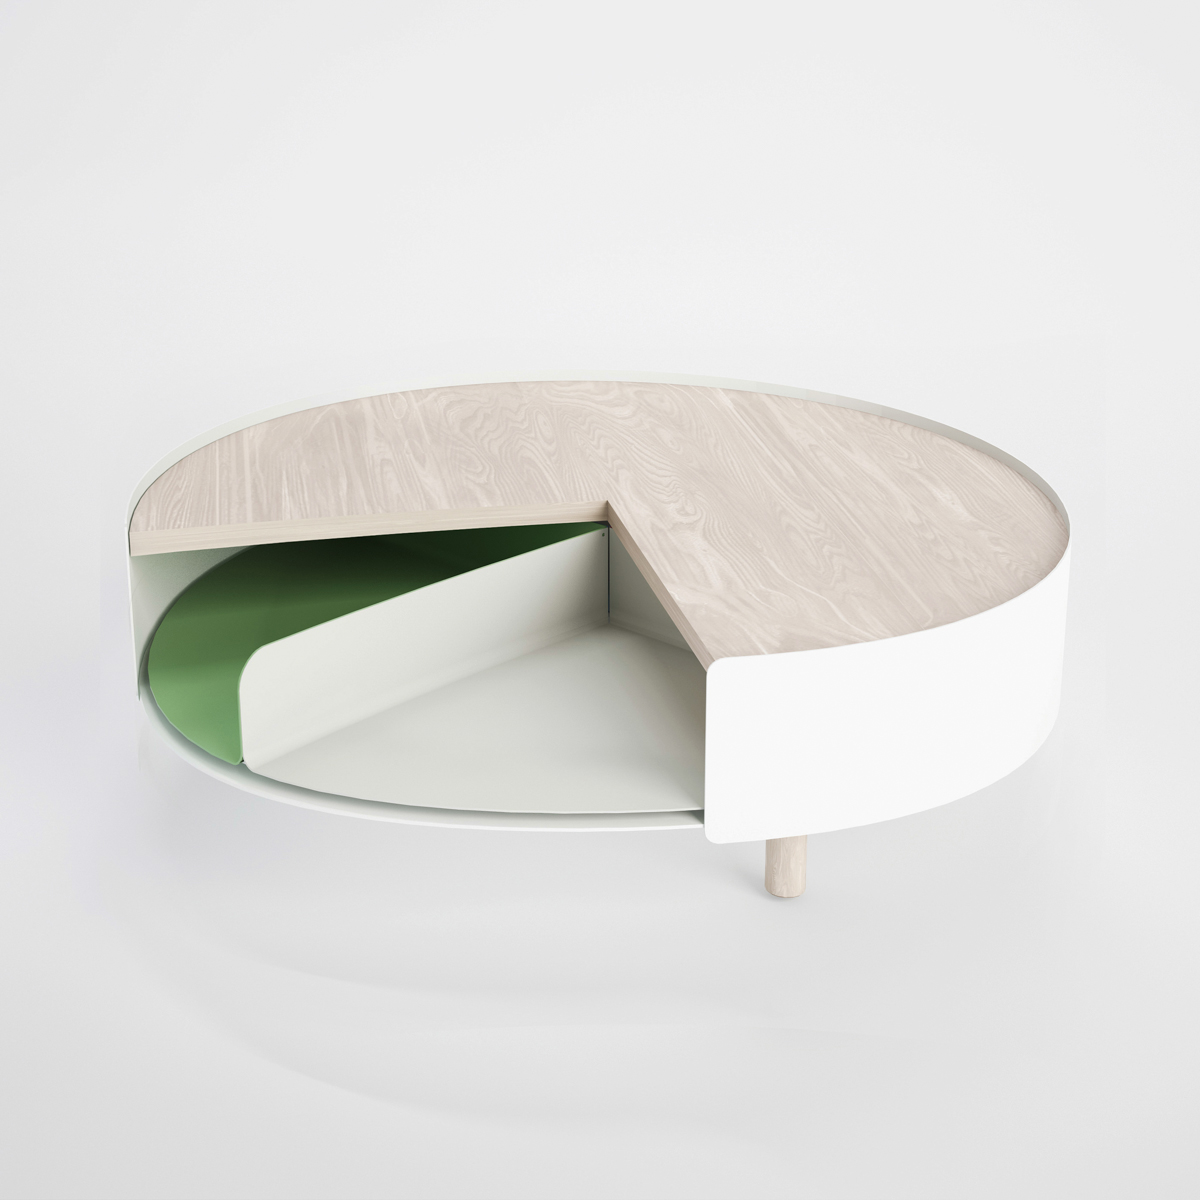 Times 4 Coffee Table: An Innovative Way of Storage